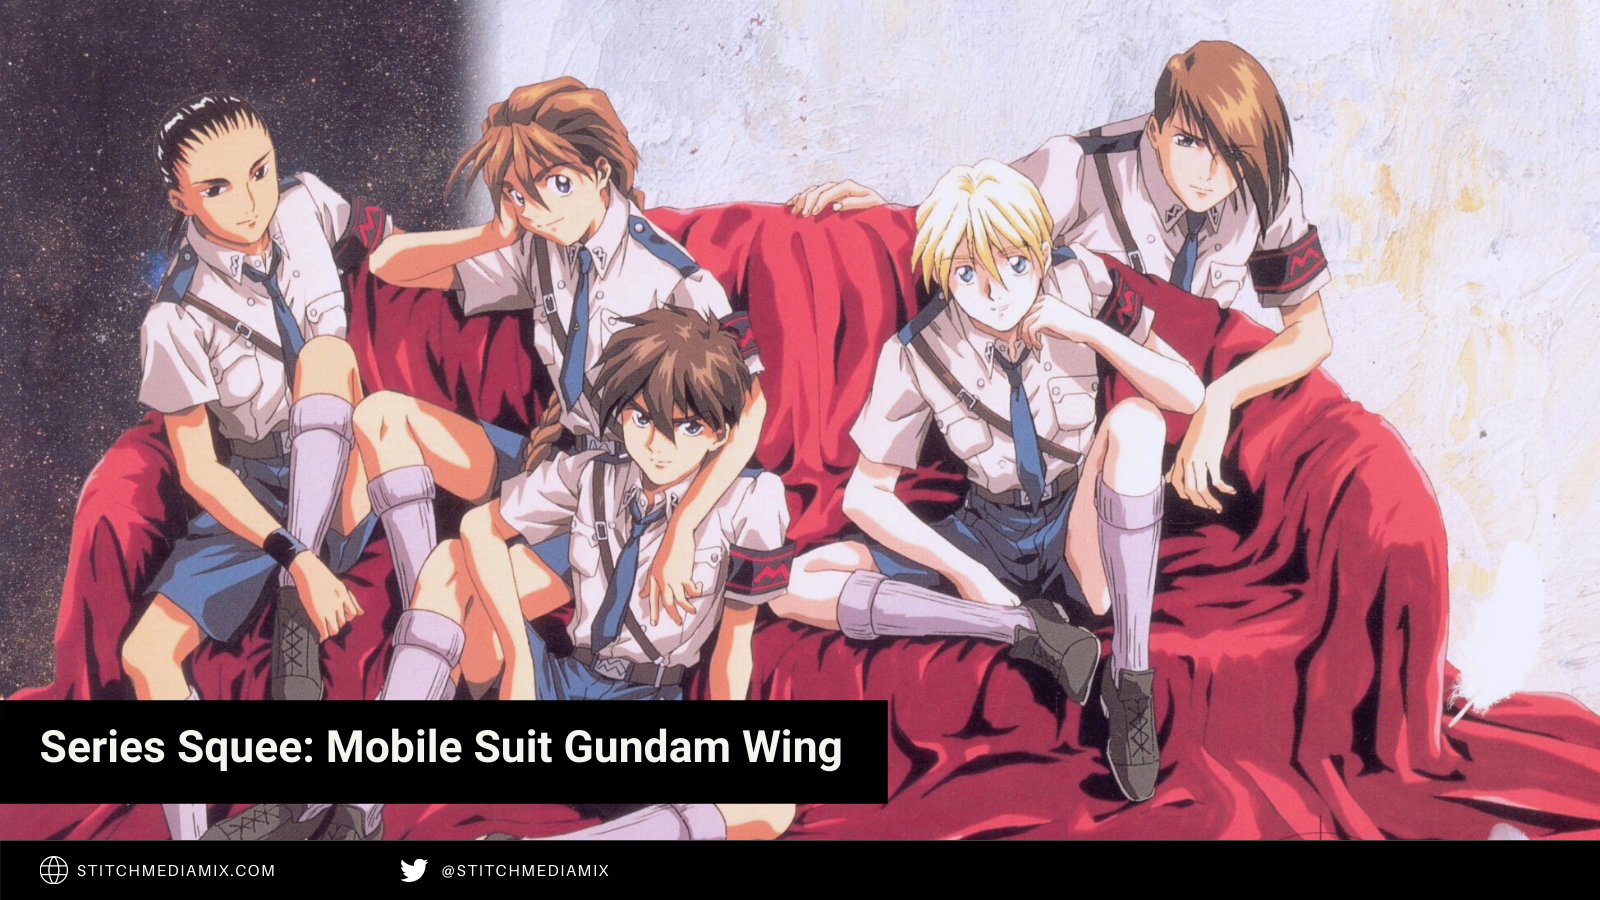 Series Squee: Mobile Suit Gundam Wing – Stitch's Media Mix